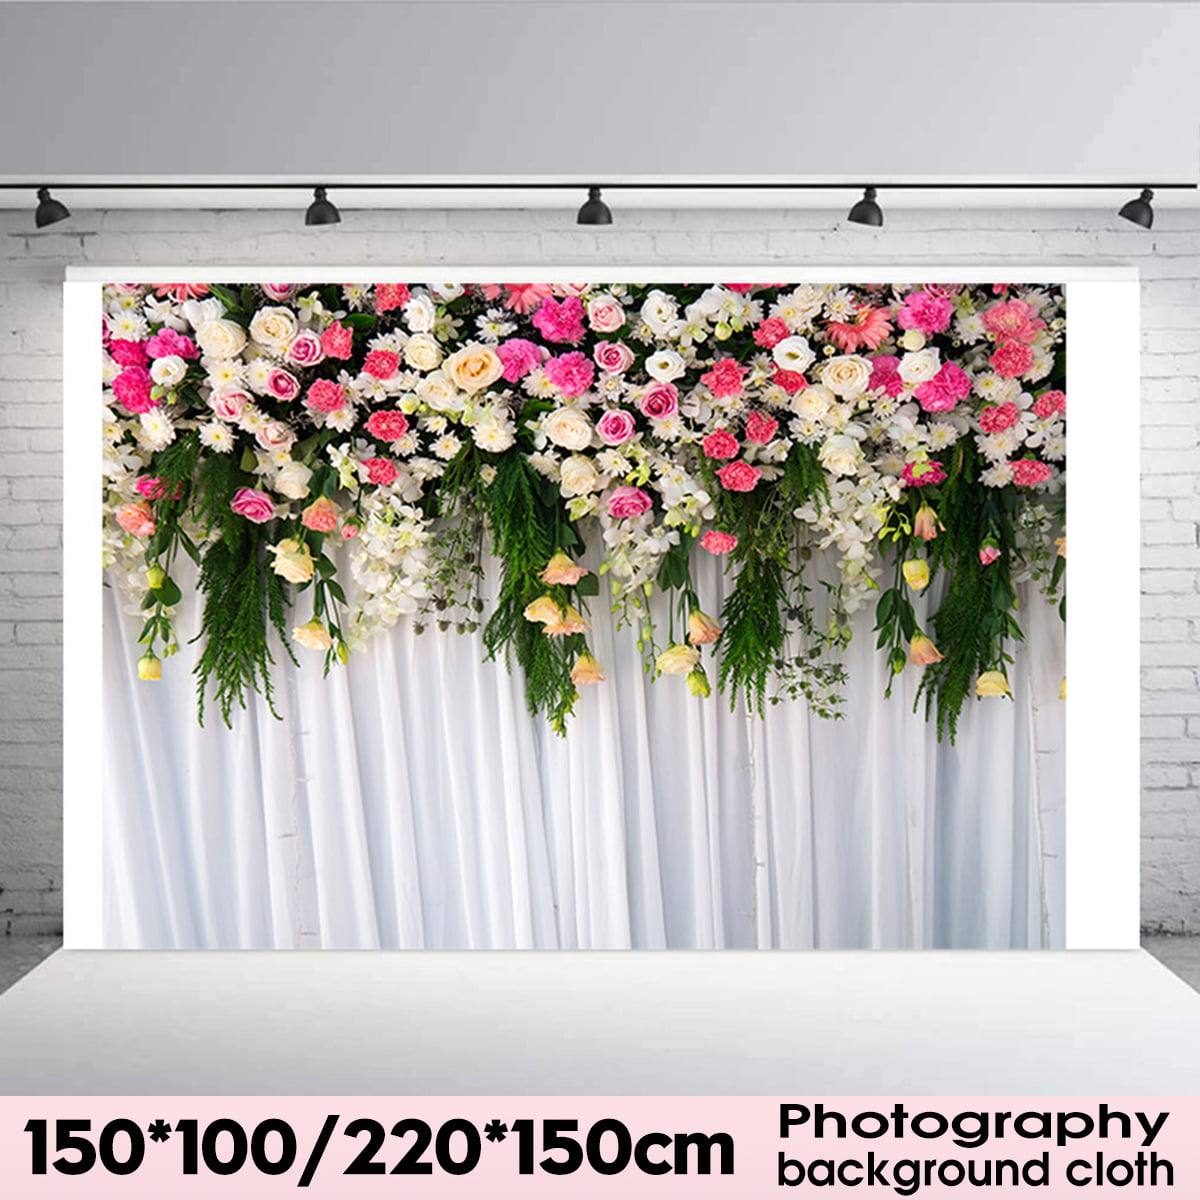 8x8FT Vinyl Backdrop Photographer,Anemone Flower,Branch of Flower Background for Party Home Decor Outdoorsy Theme Shoot Props